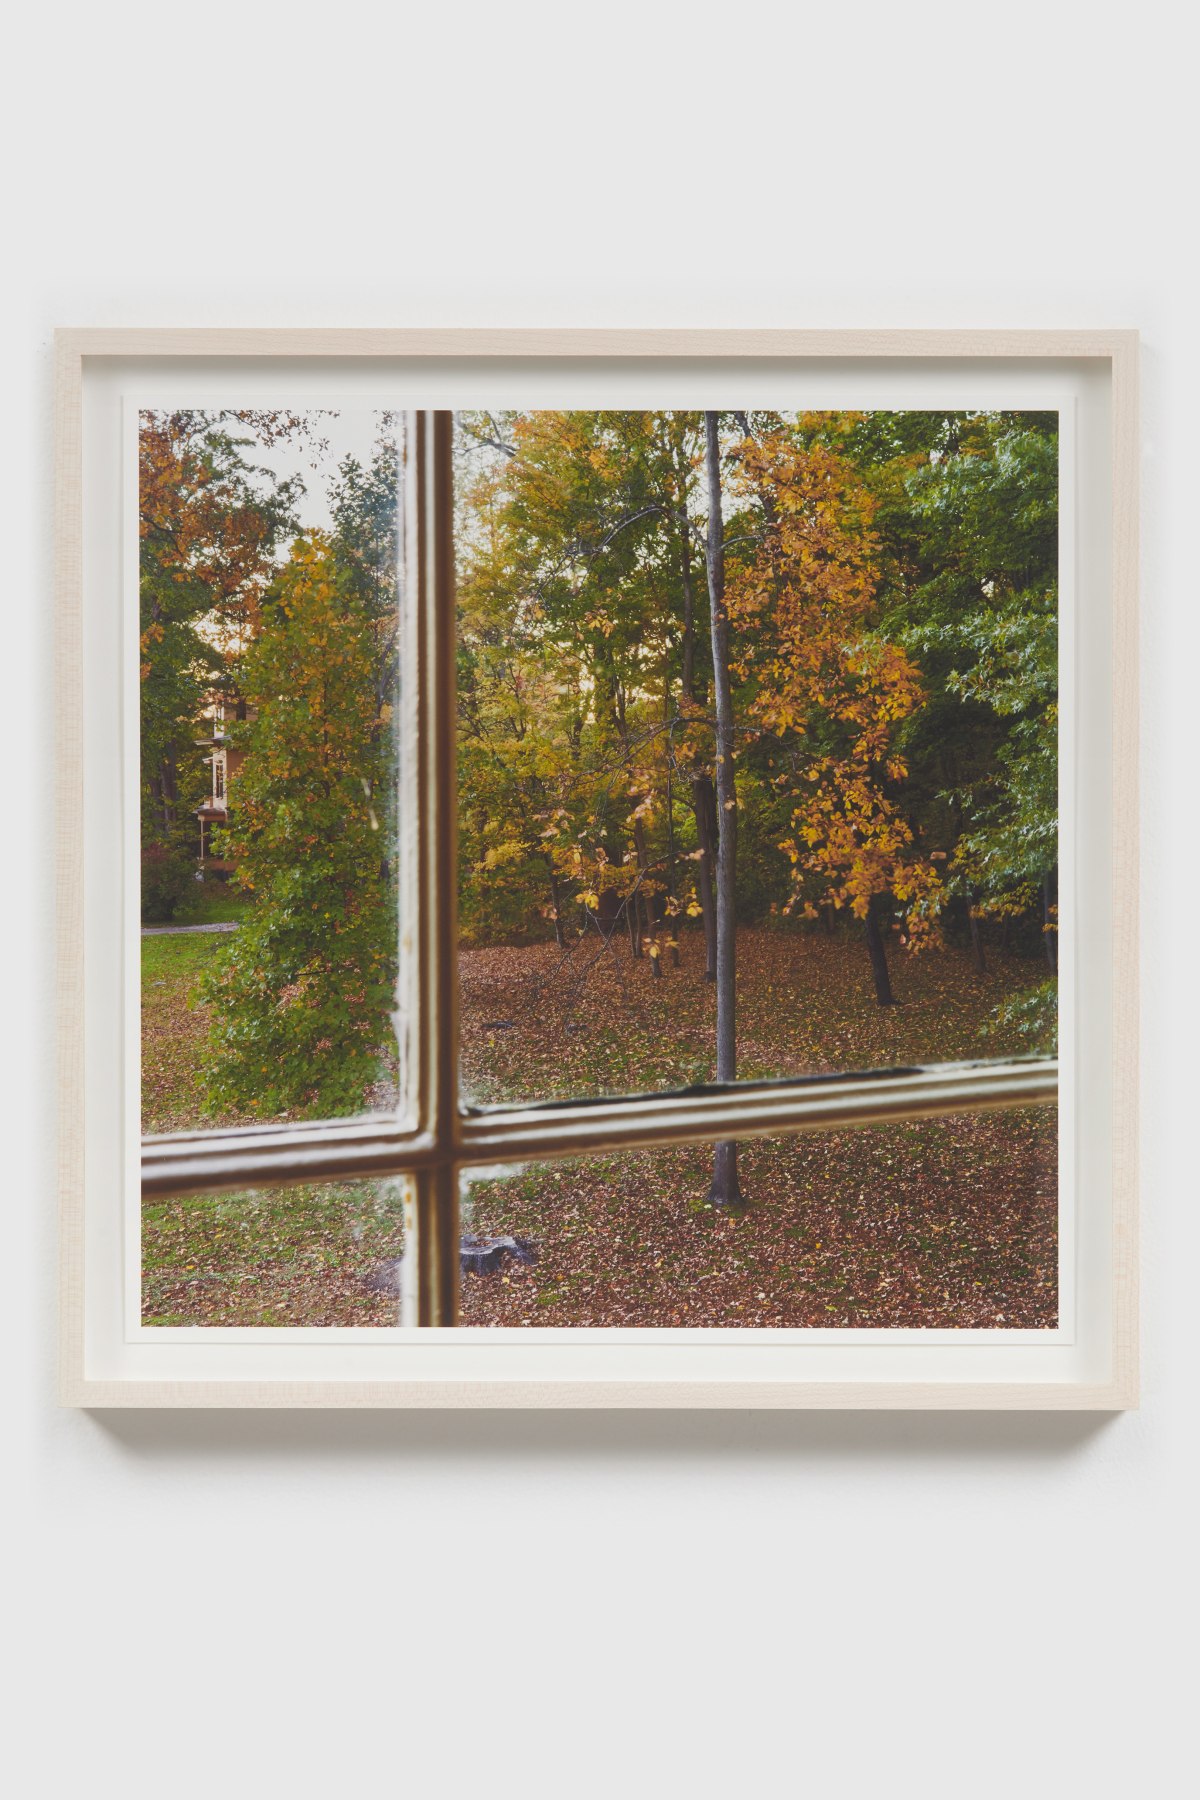 Image of one of the photographs making up SPENCER FINCH's The Outer - from the Inner (Emily Dickinson&rsquo;s bedroom,&nbsp;dusk), 2018